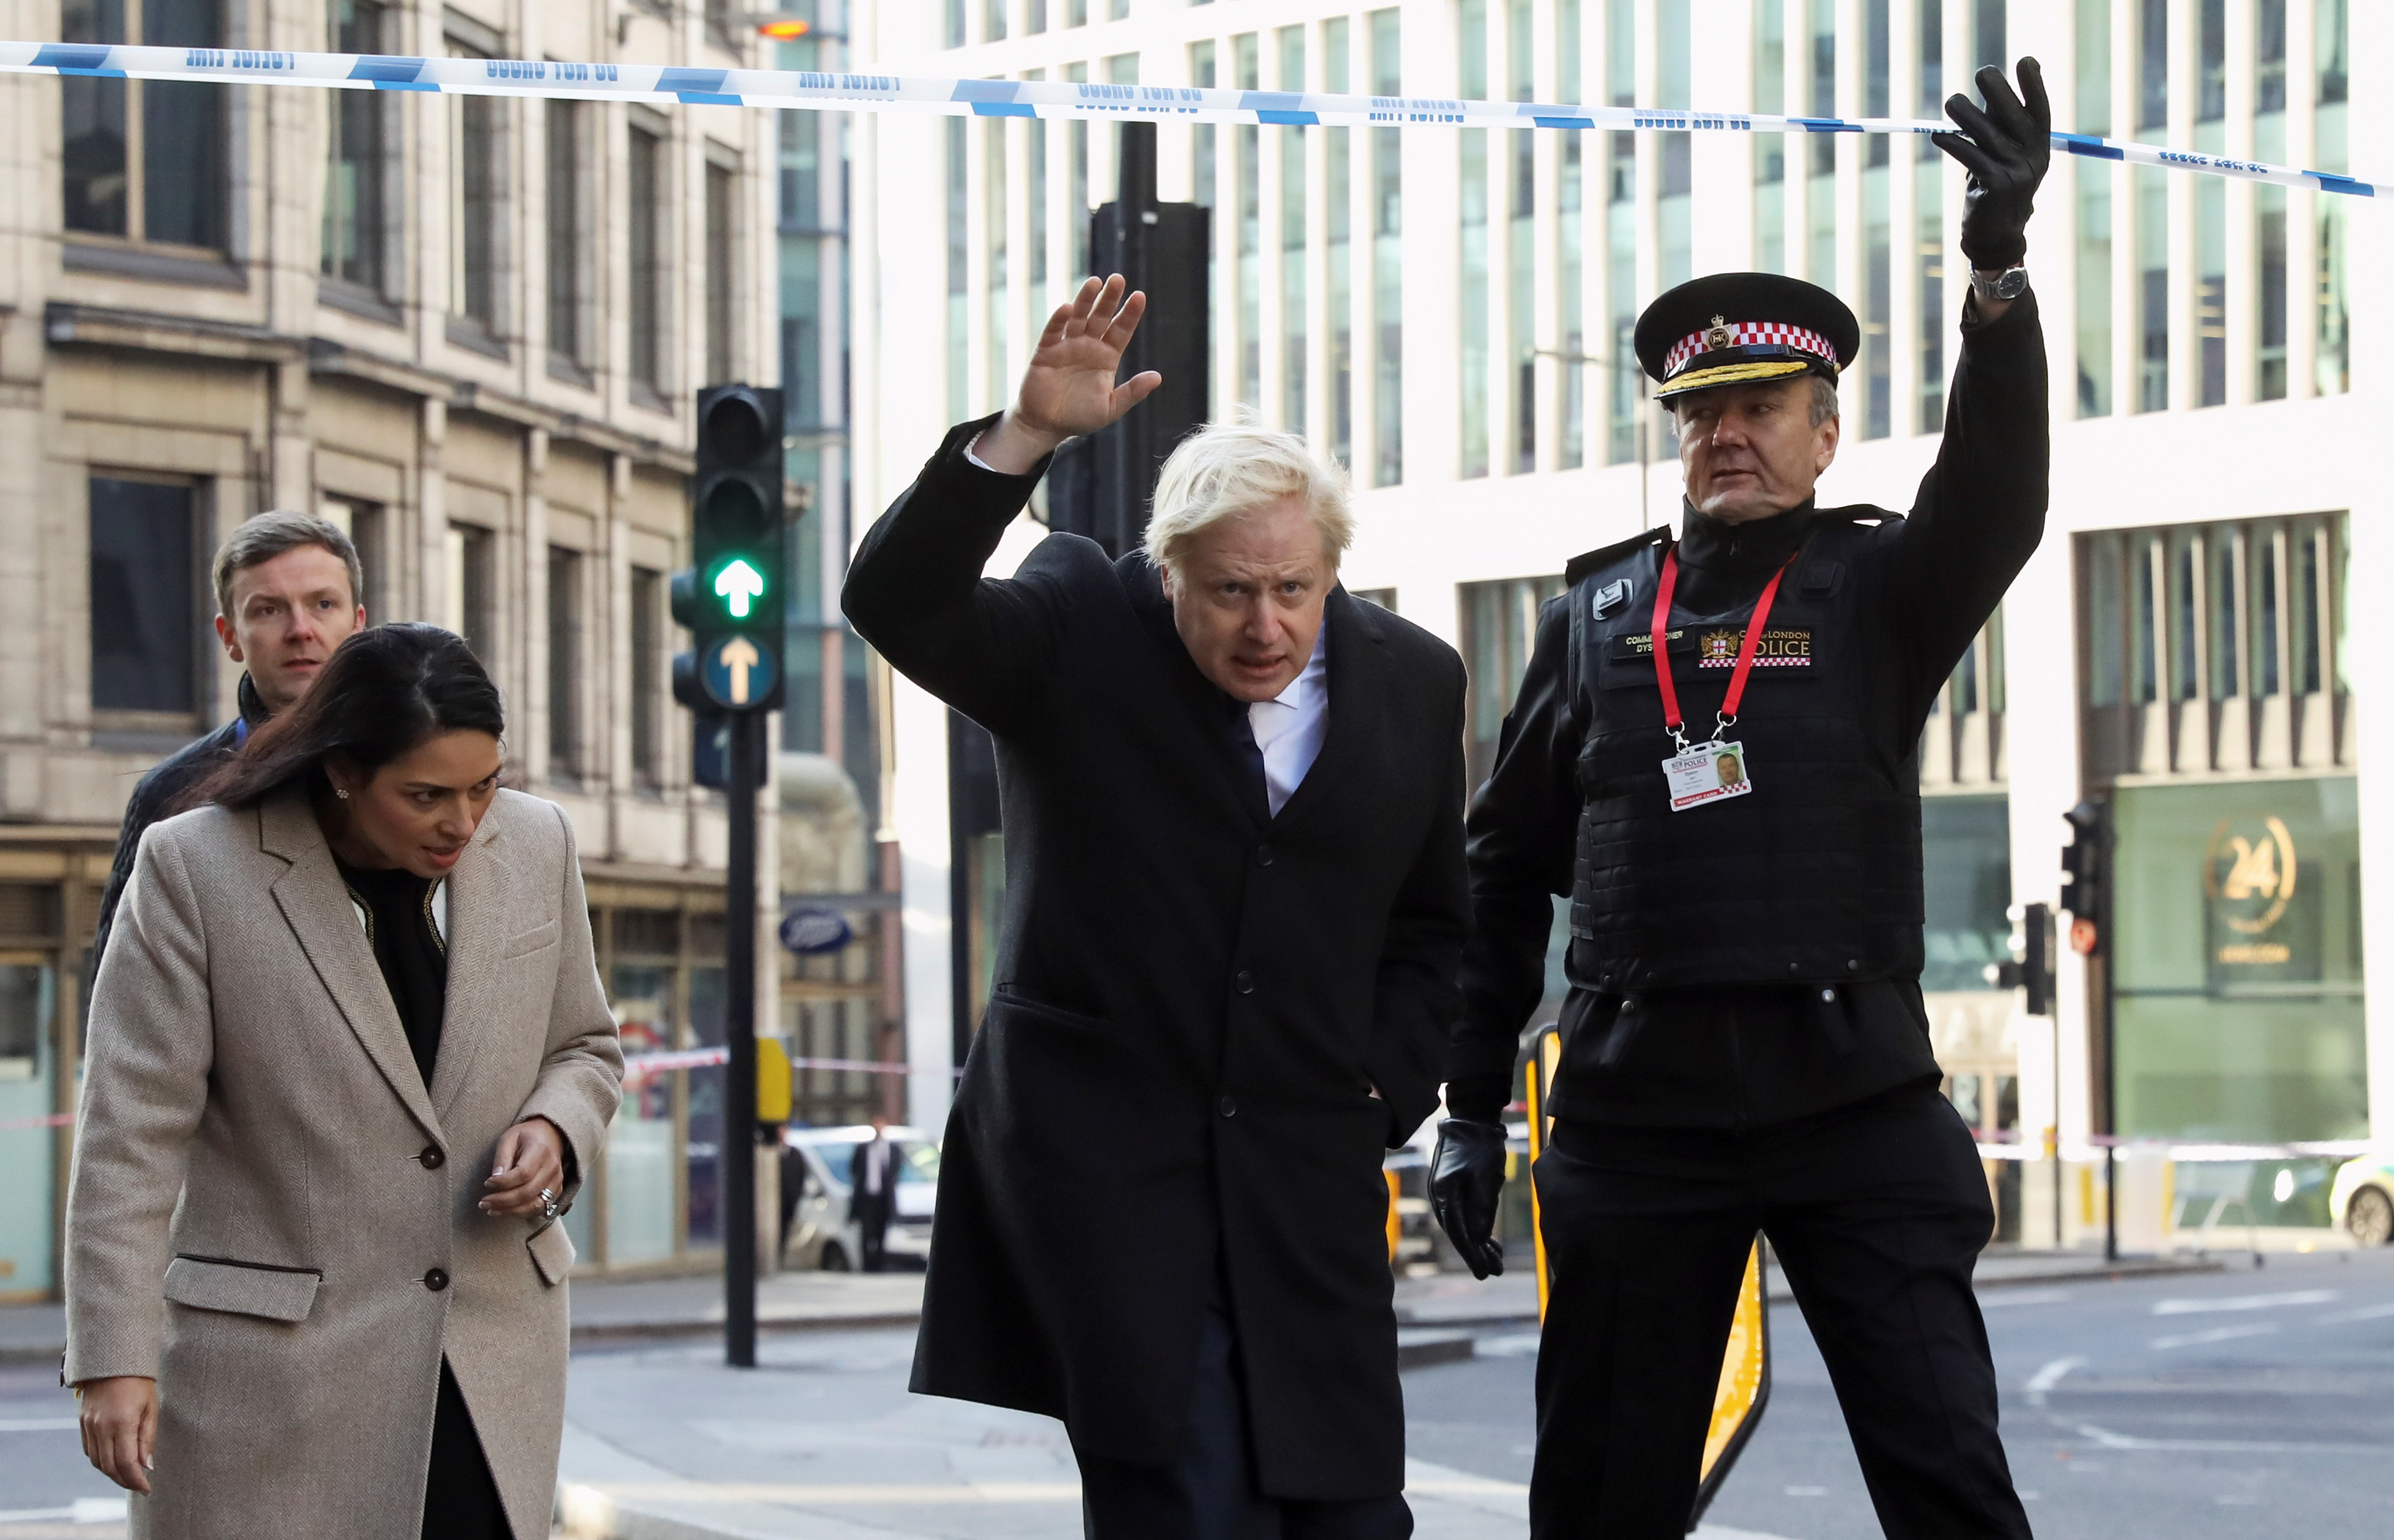 Britain's Prime Minister Boris Johnson, Home Secretary Priti Patel and City of London commissioner Ian Dyson arrive at the scene of a stabbing on London Bridge, in which two people were killed, in London November 30, 2019. u00e2u20acu201d Reuters pic